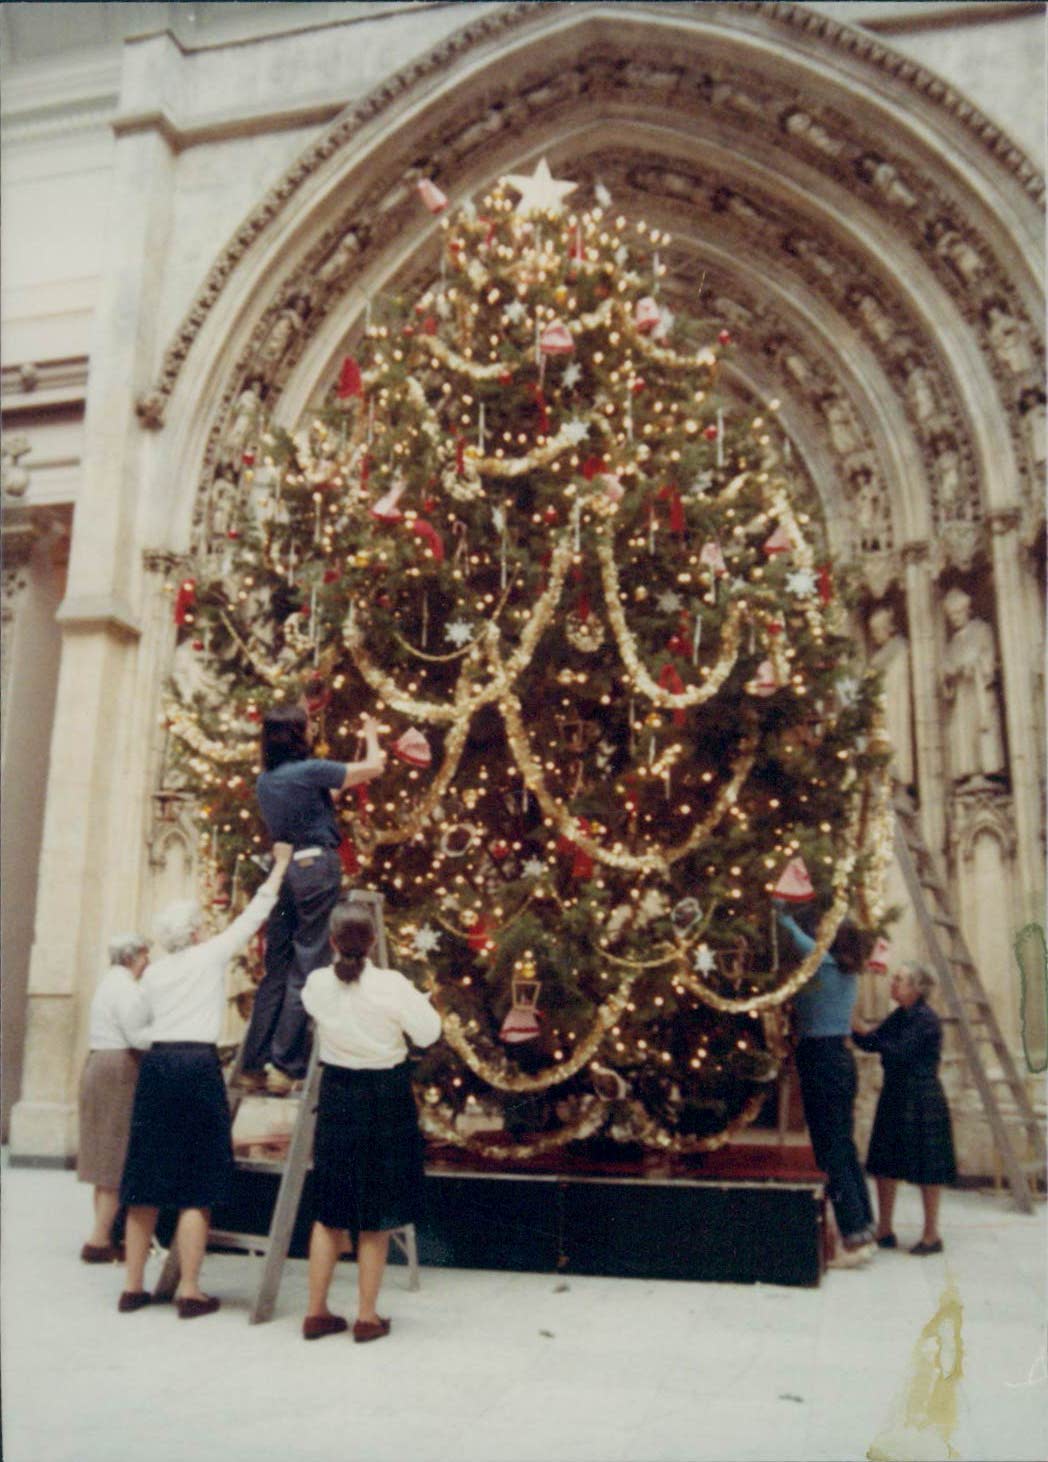 A group of women decorate a tree.